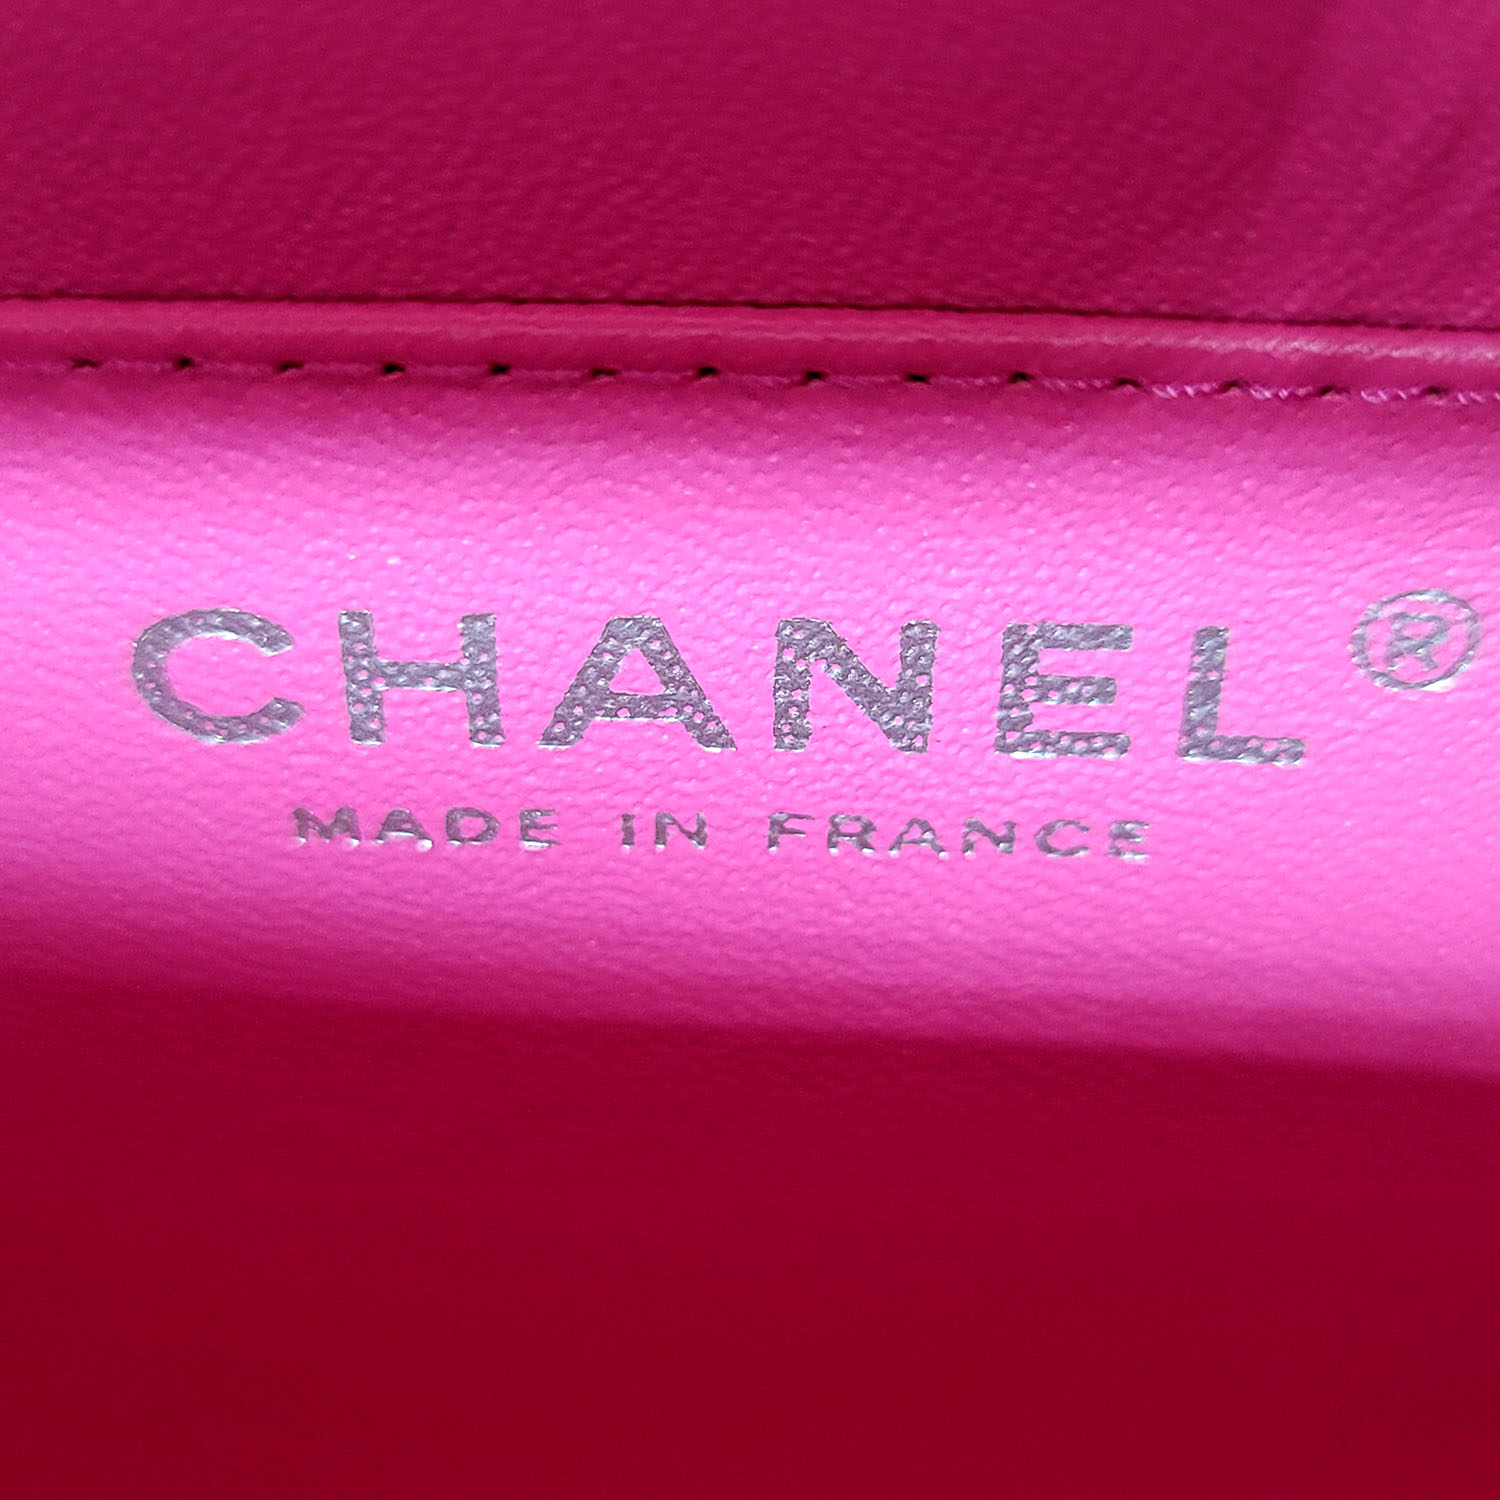 FIVE Reasons Why I'm No Longer Buying Chanel Lambskin Bags (Wear & Tear  Review!) - Fashion For Lunch.